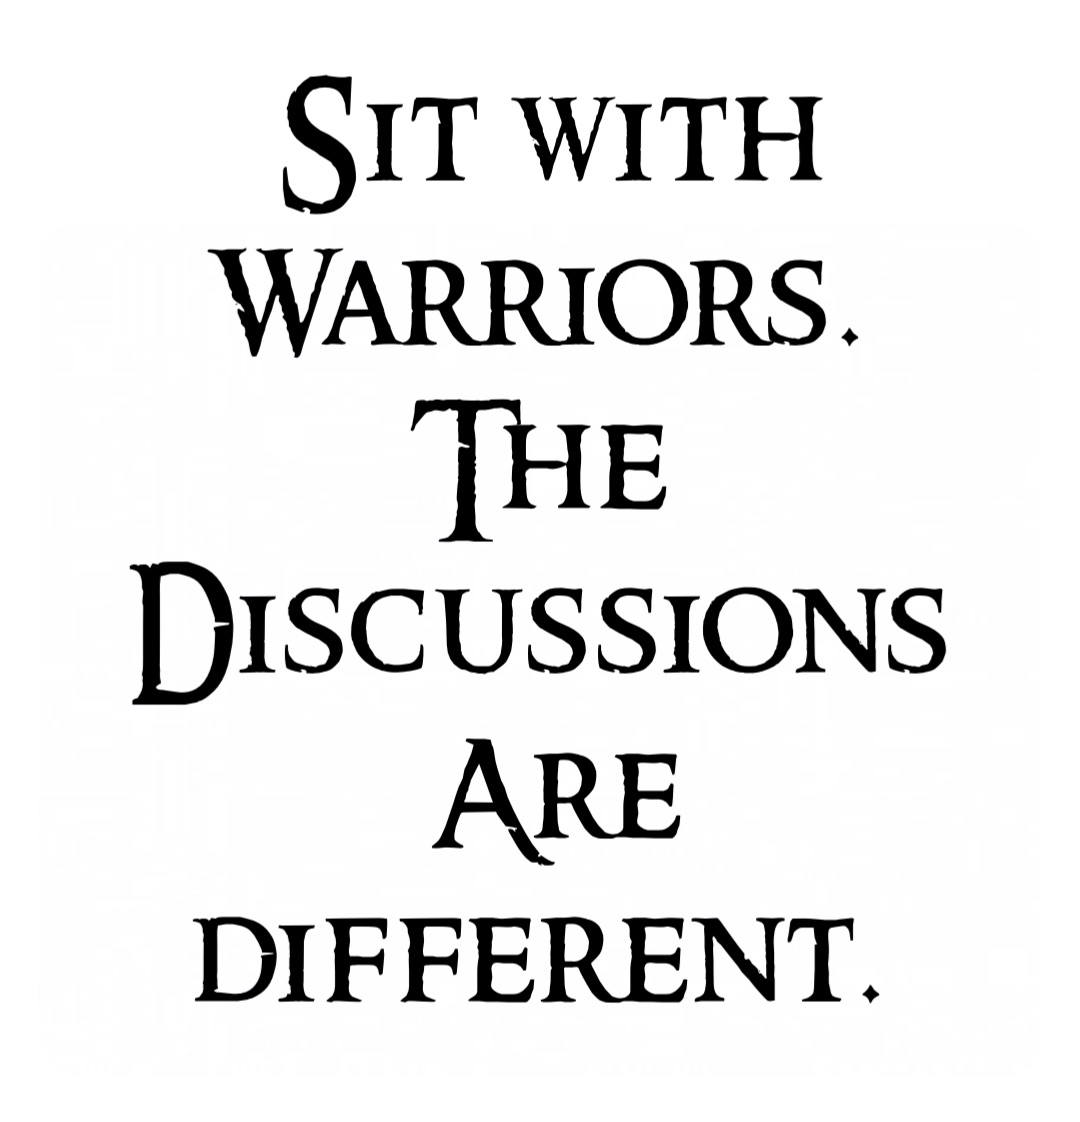 Sit with 
Warriors.
The
Discussions
Are different.